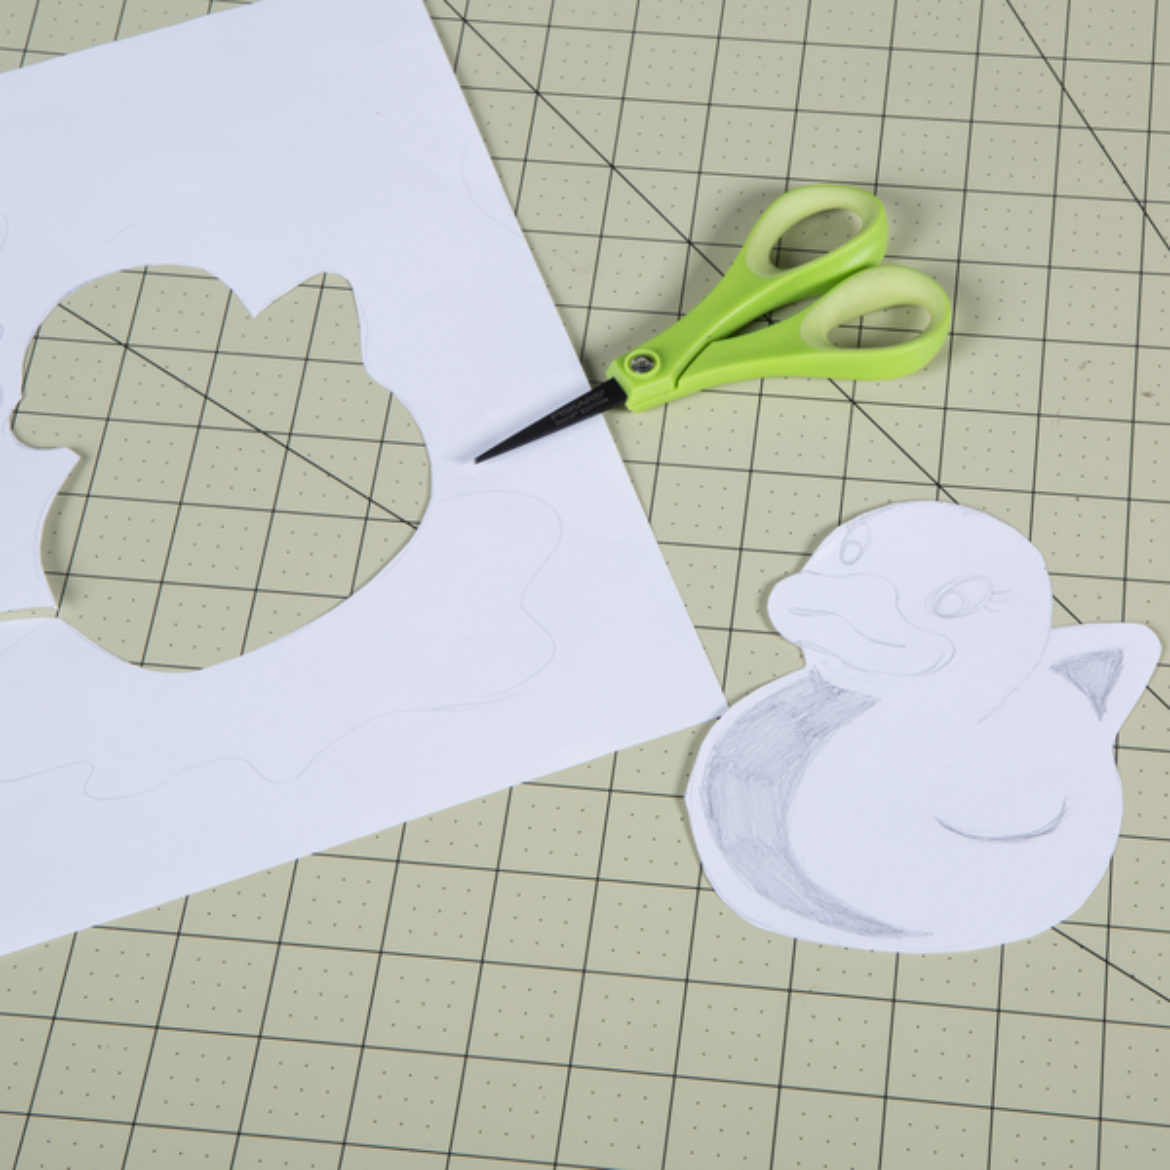 Full Duck outline cut out of the picture from the first step